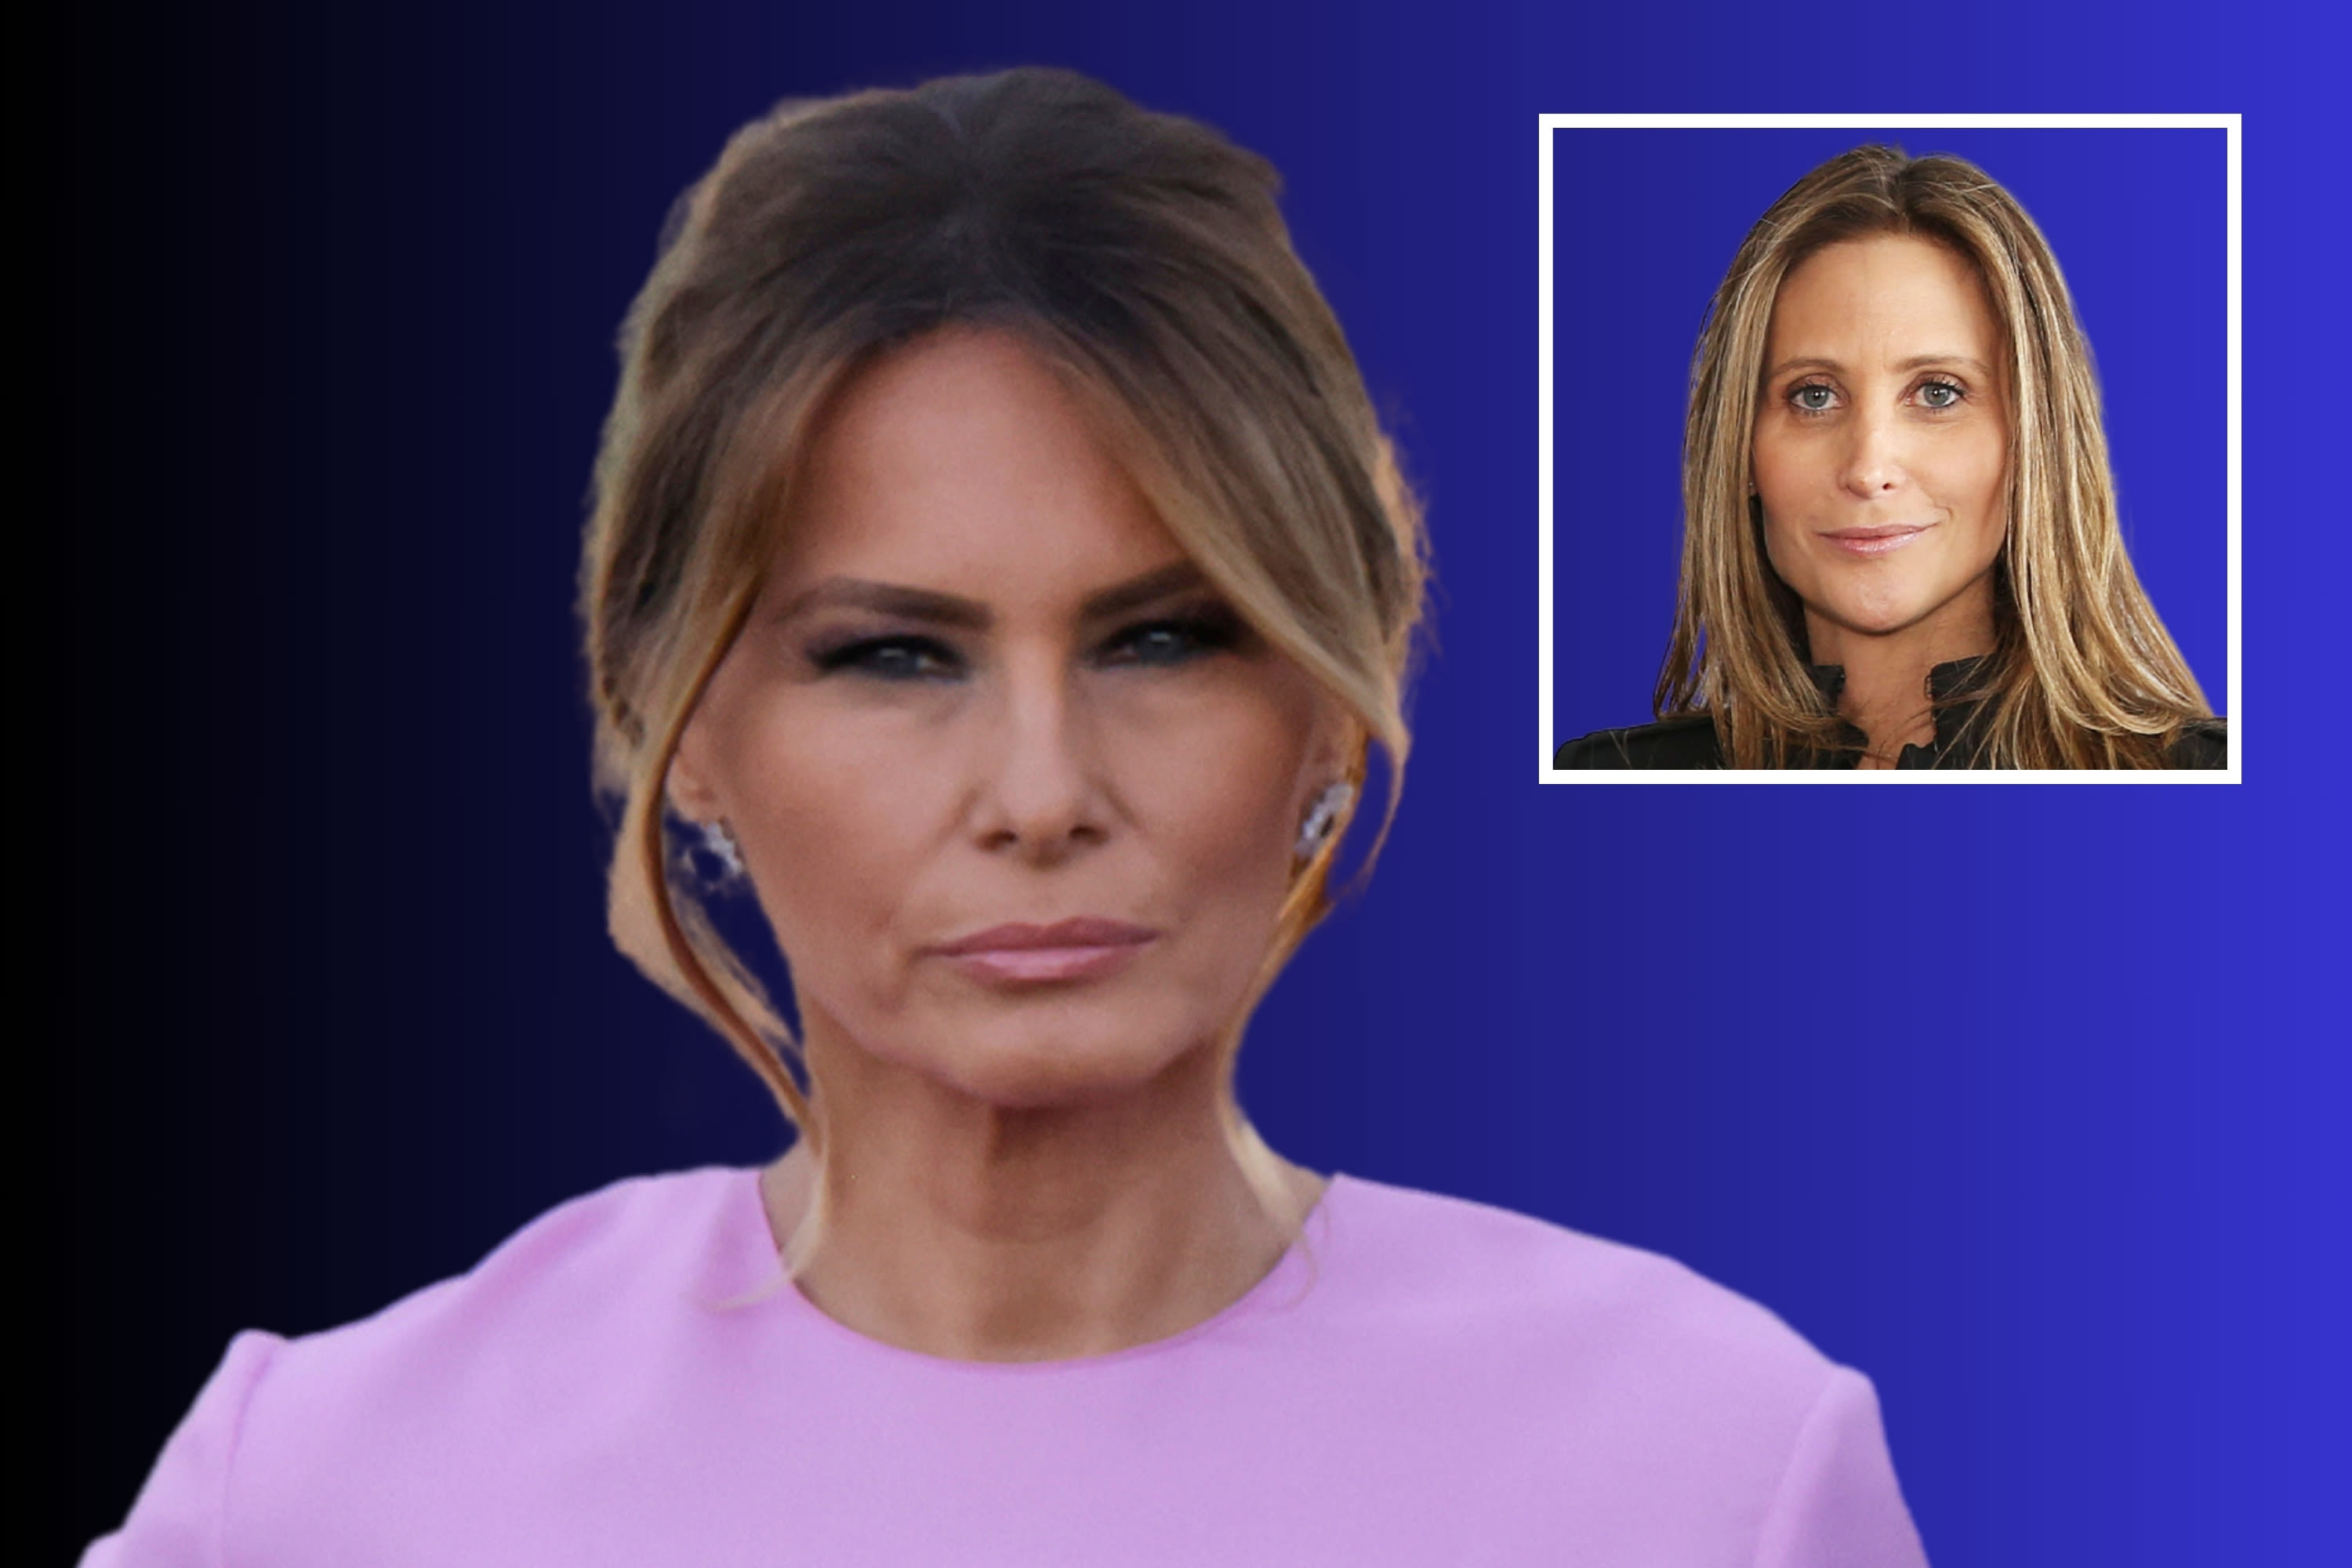 Melania Trump's former aide slams her Mother's Day message